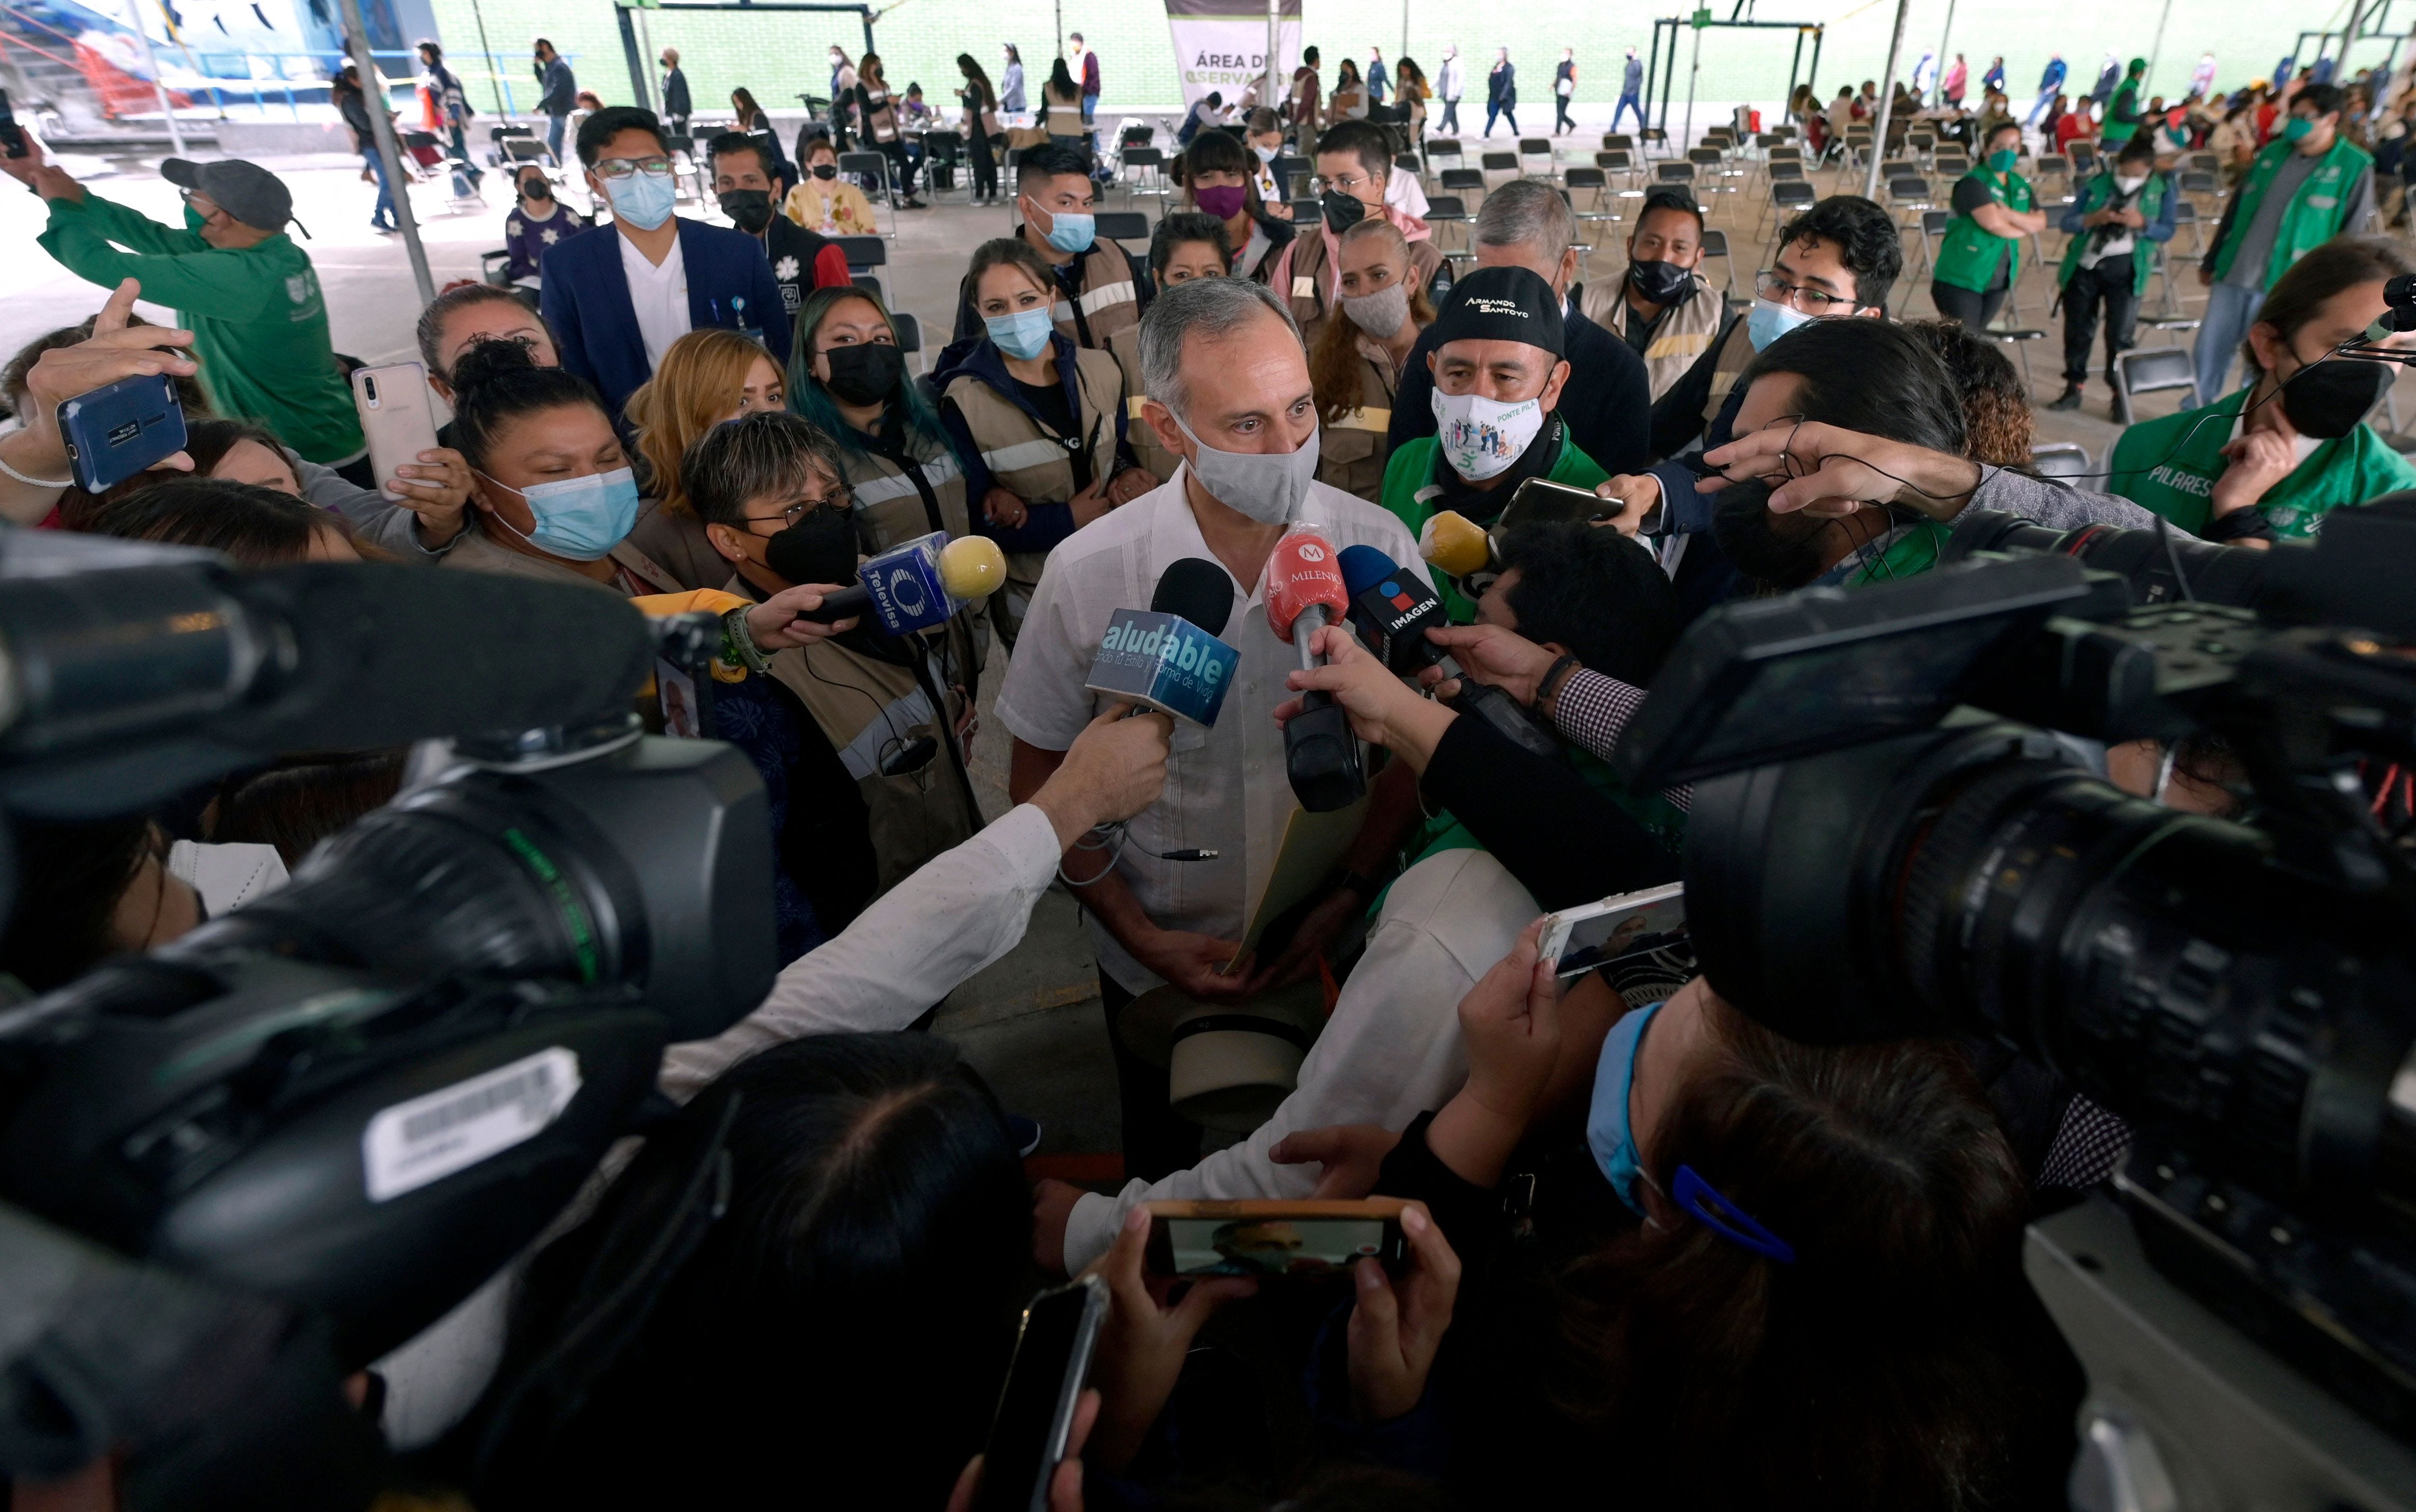 Mexico's undersecretary of health, Hugo Lopez-Gatell, speaks after receiving his first dose of the Pfizer-BioNTech vaccine against COVID-19 at a vaccination center May 13 in Mexico City.